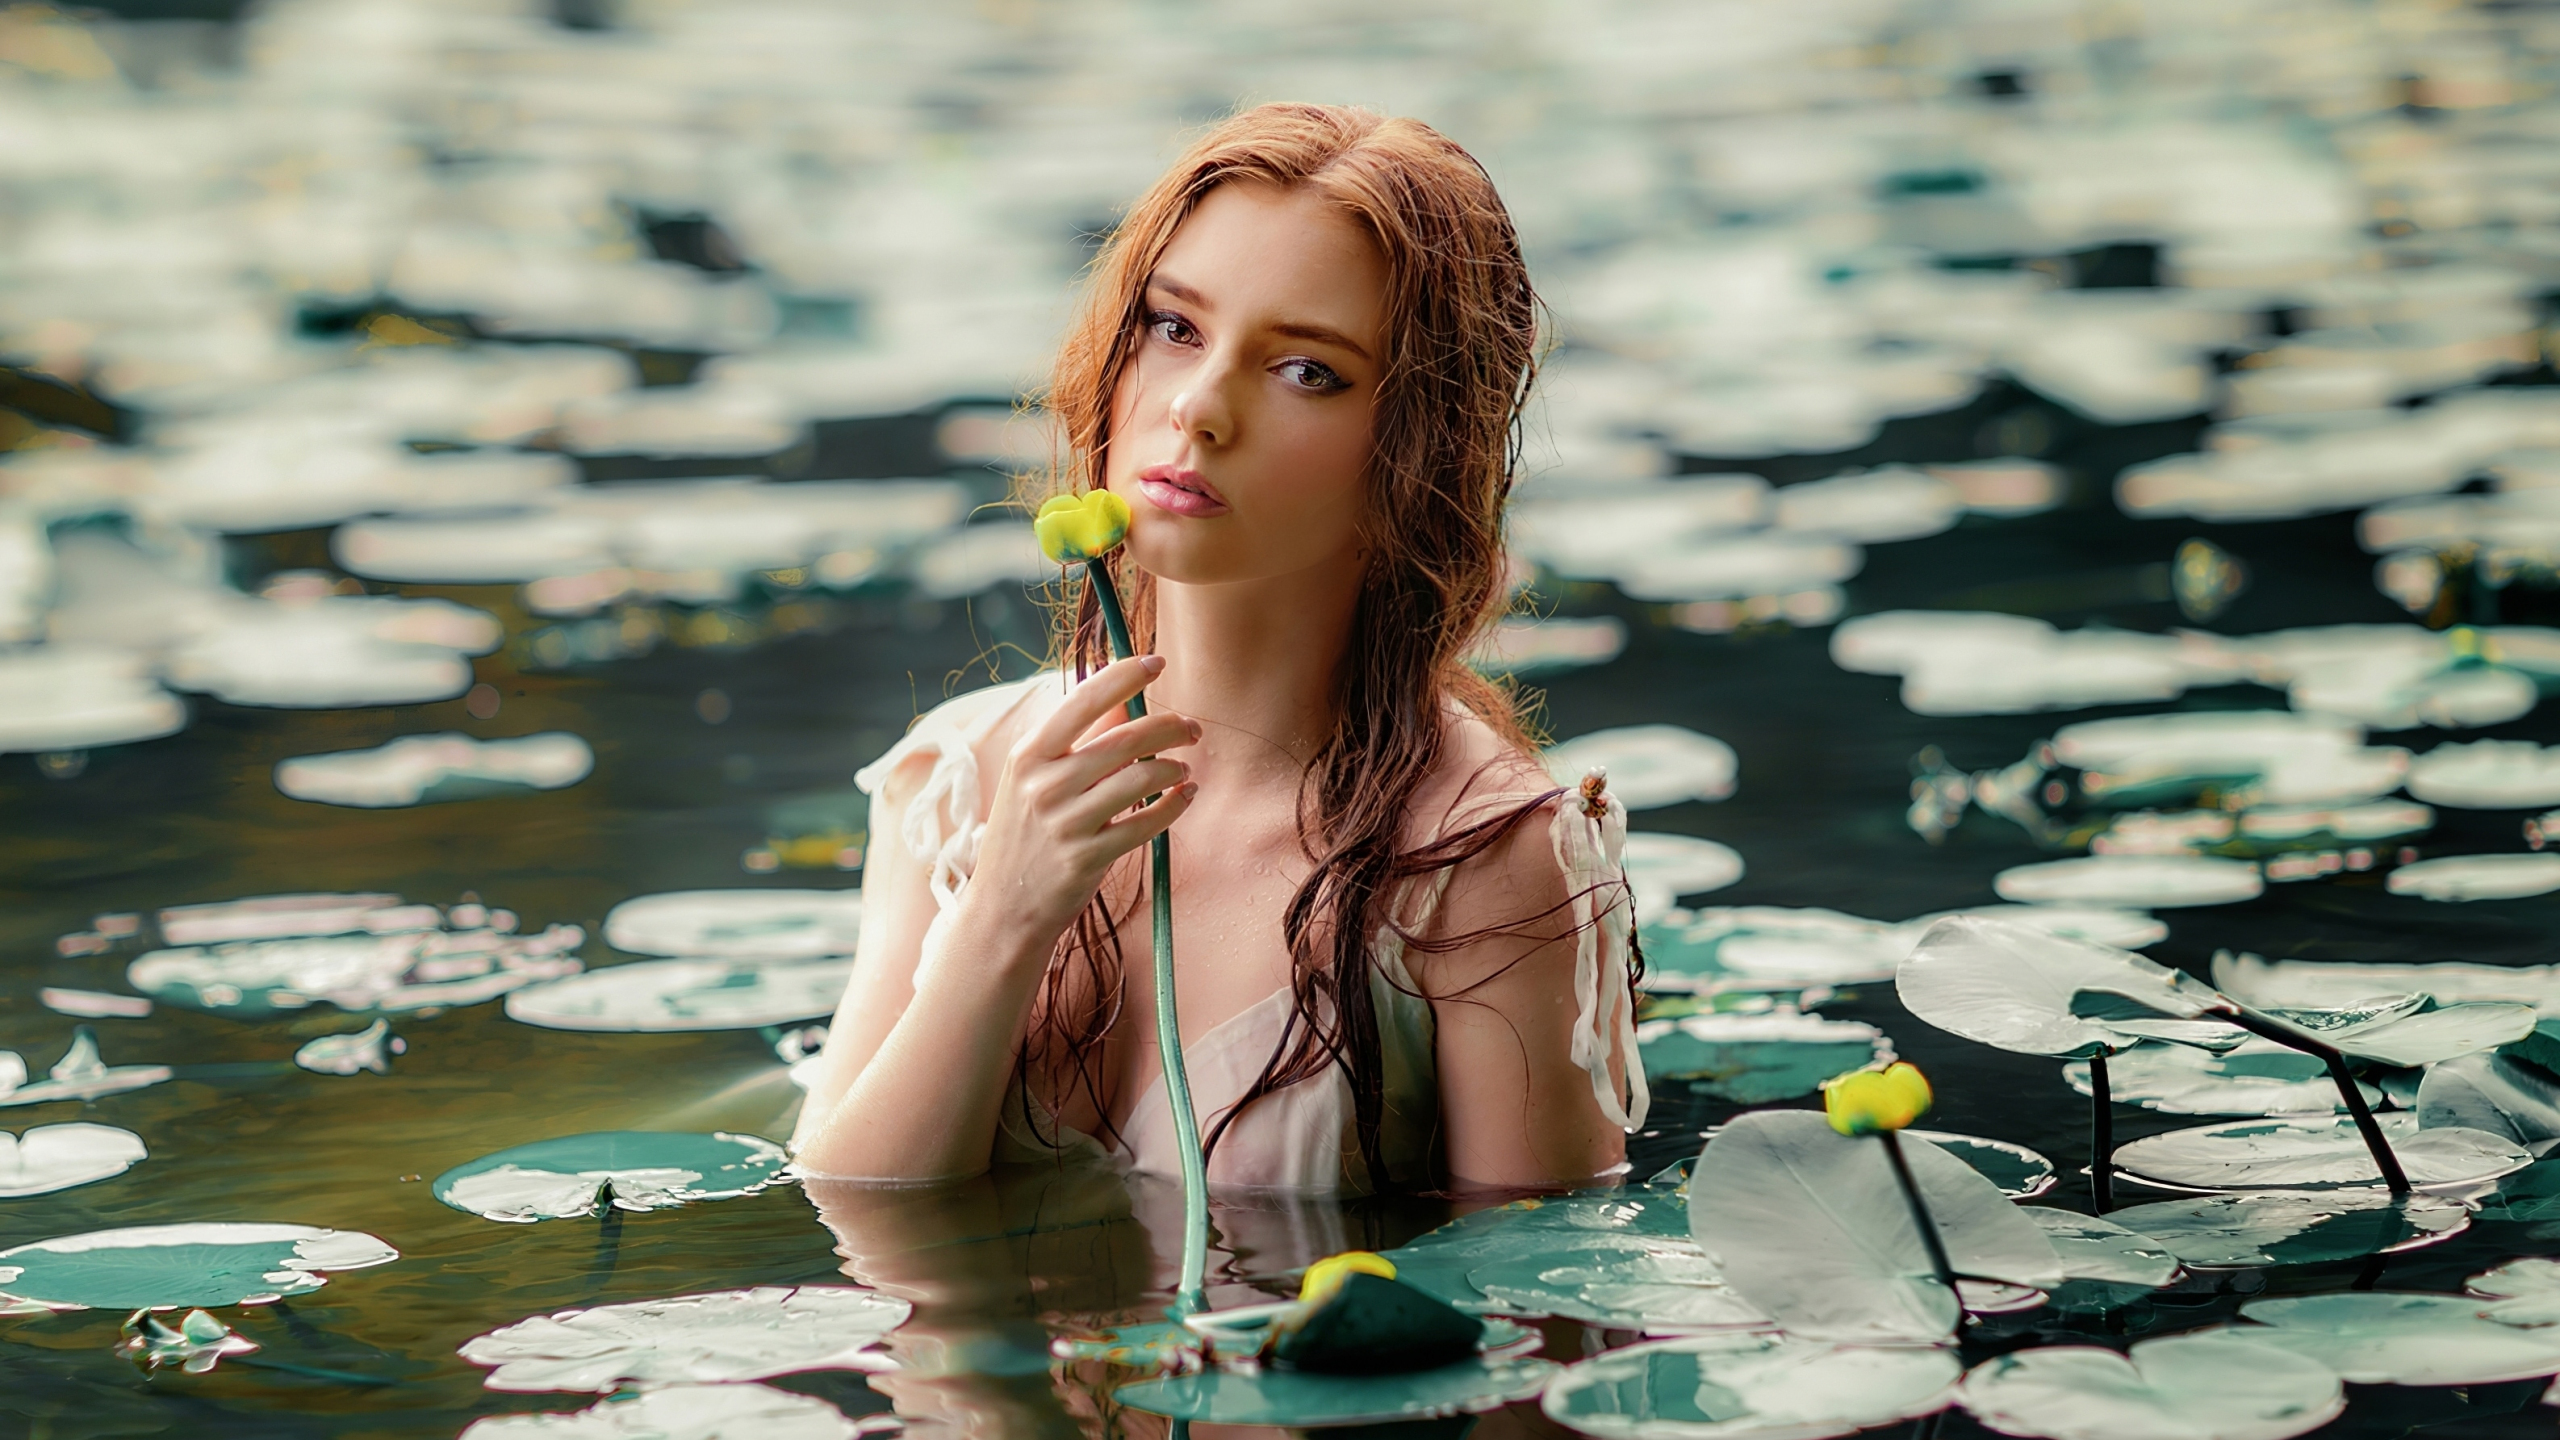 Download 2560x1440 wallpaper girl with flowers, outdoor, lake, dual